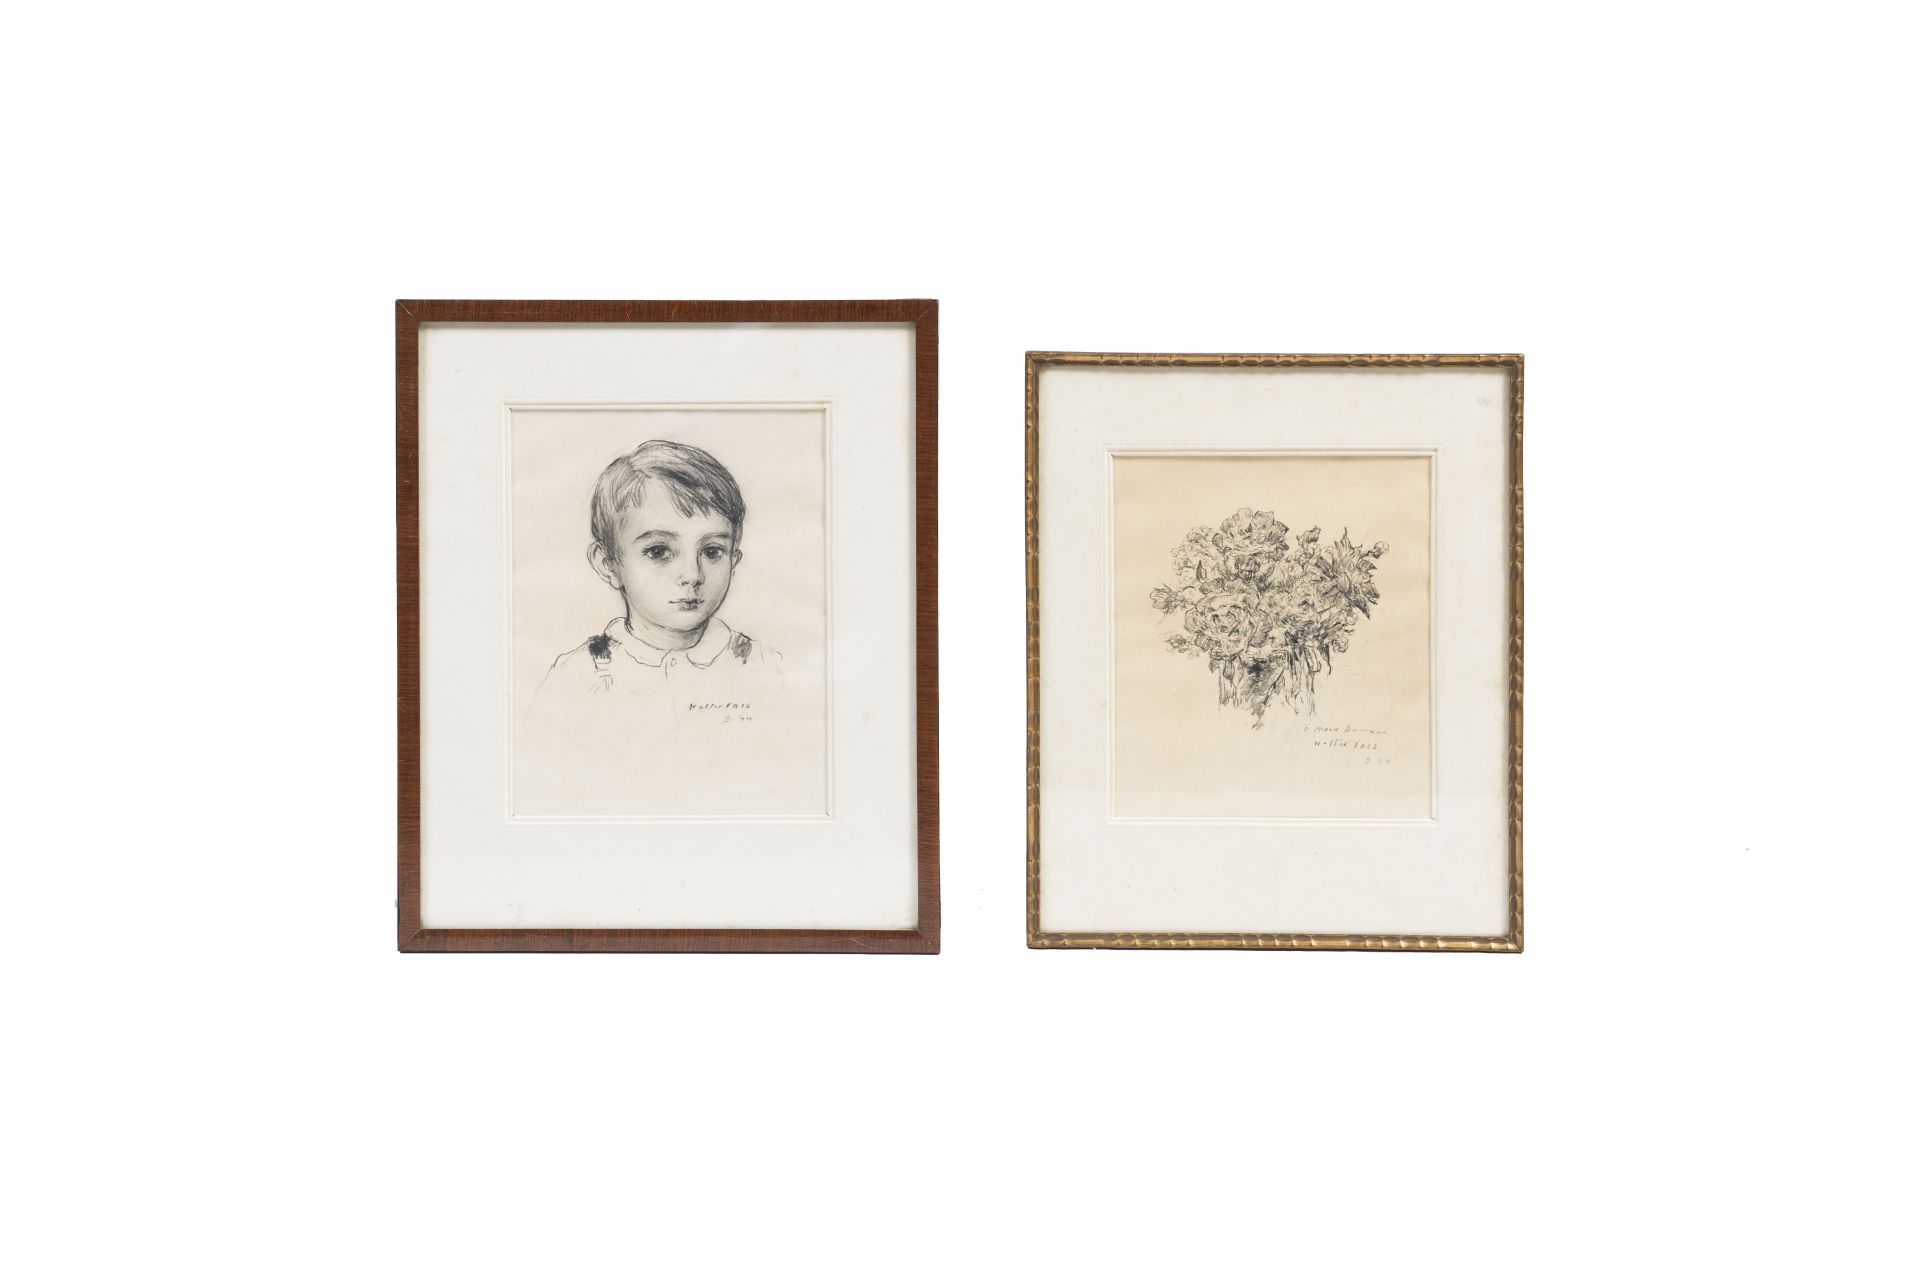 Walter Vaes (1882-1958): Still life of flowers and Portrait of a boy, pencil on paper, dated (19)44